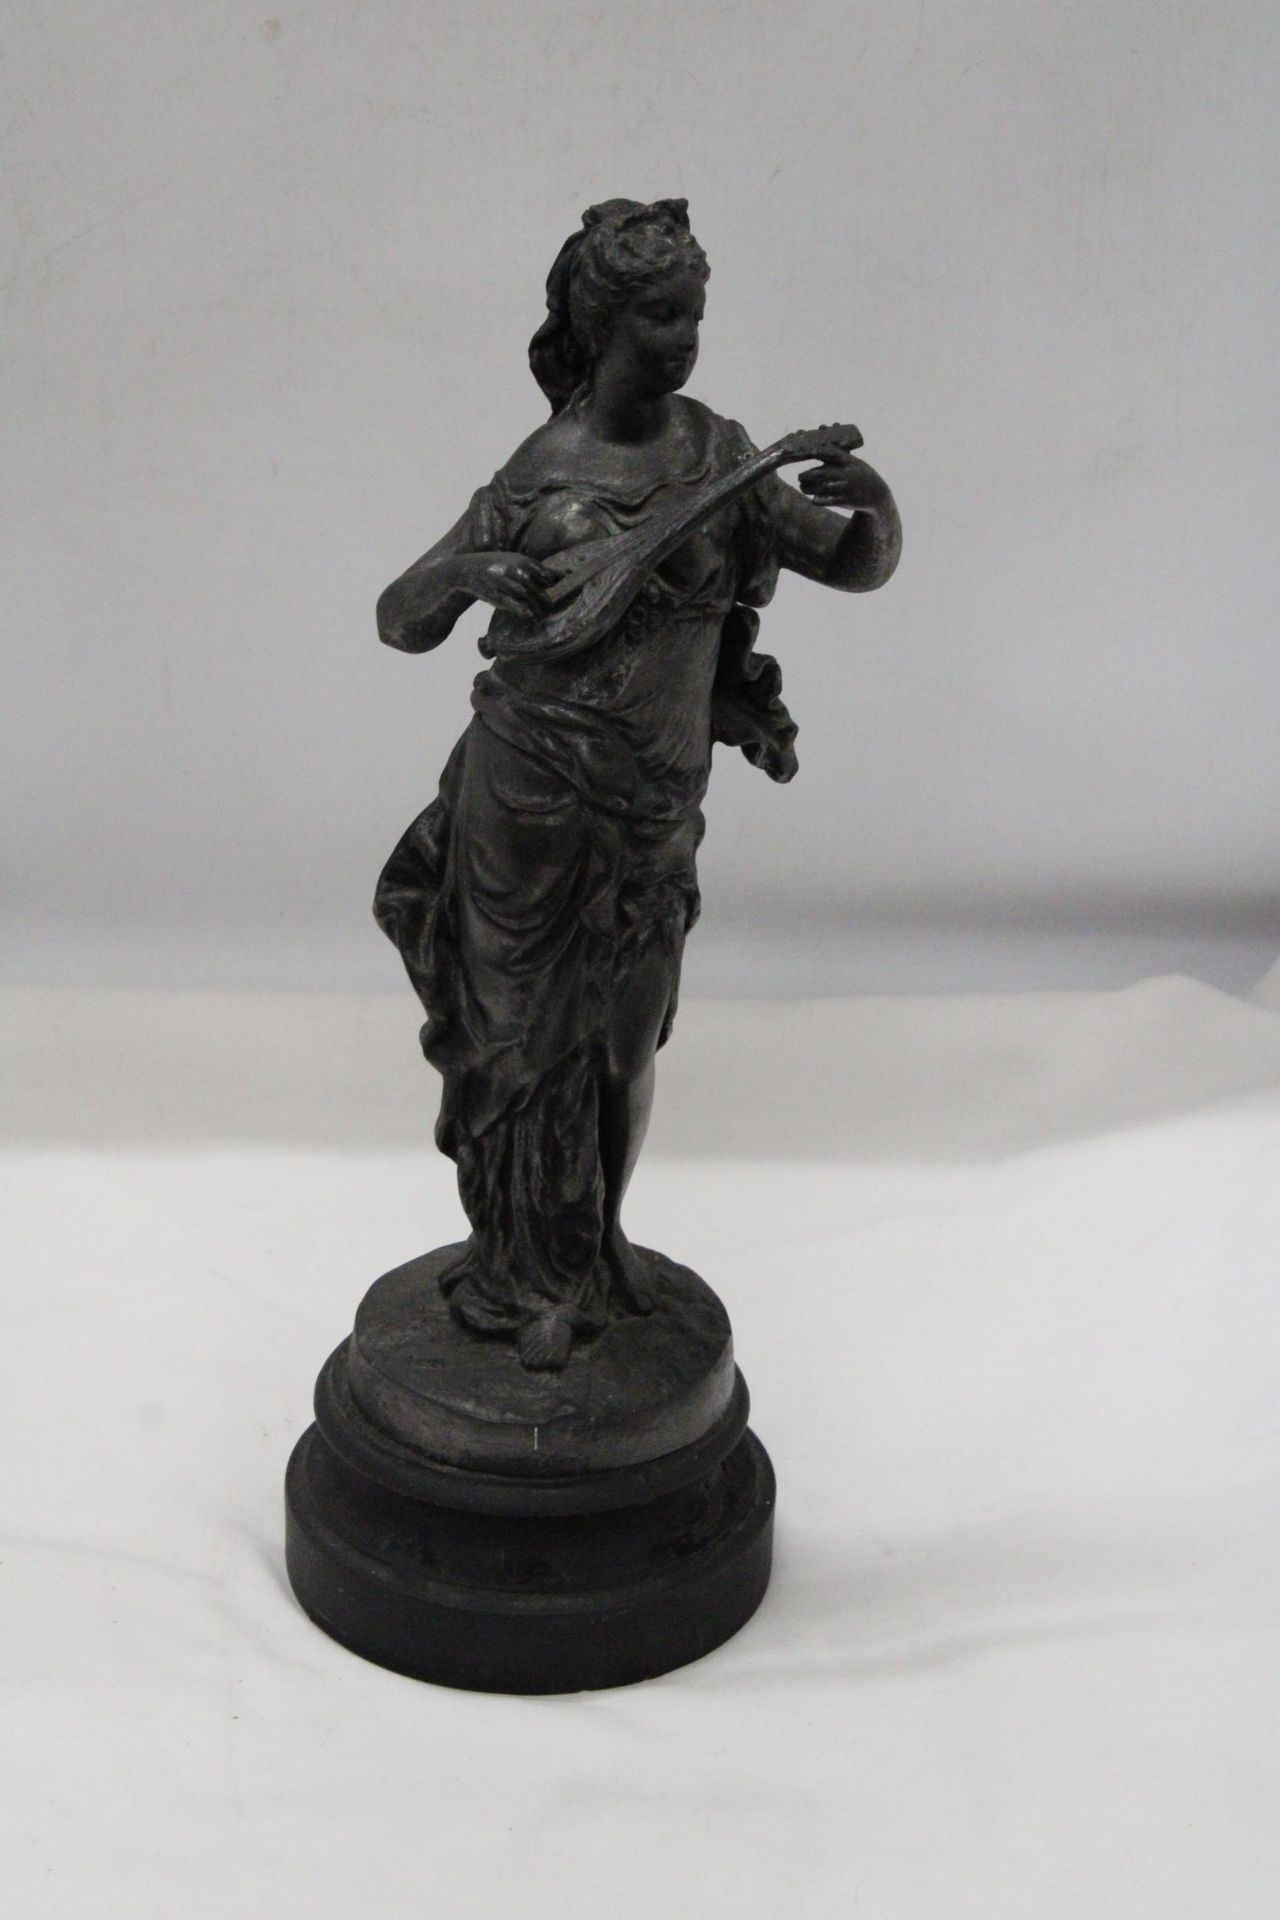 A METAL FIGURE OF A WOMAN ON PLITH